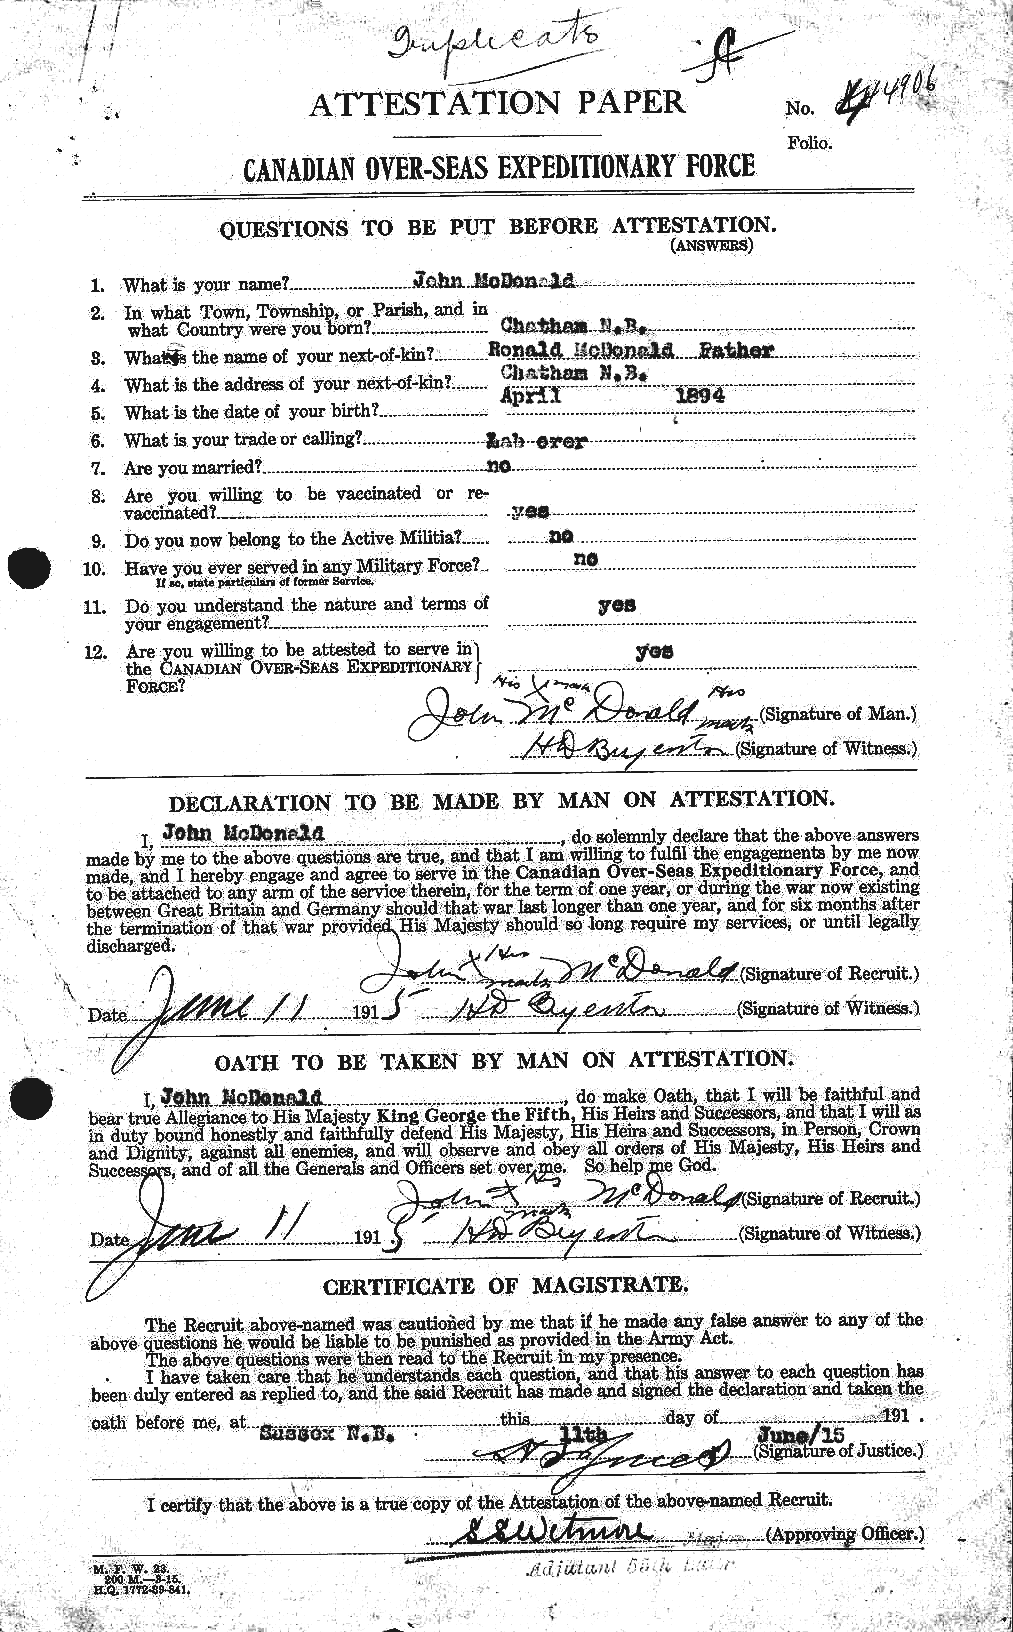 Personnel Records of the First World War - CEF 532223a